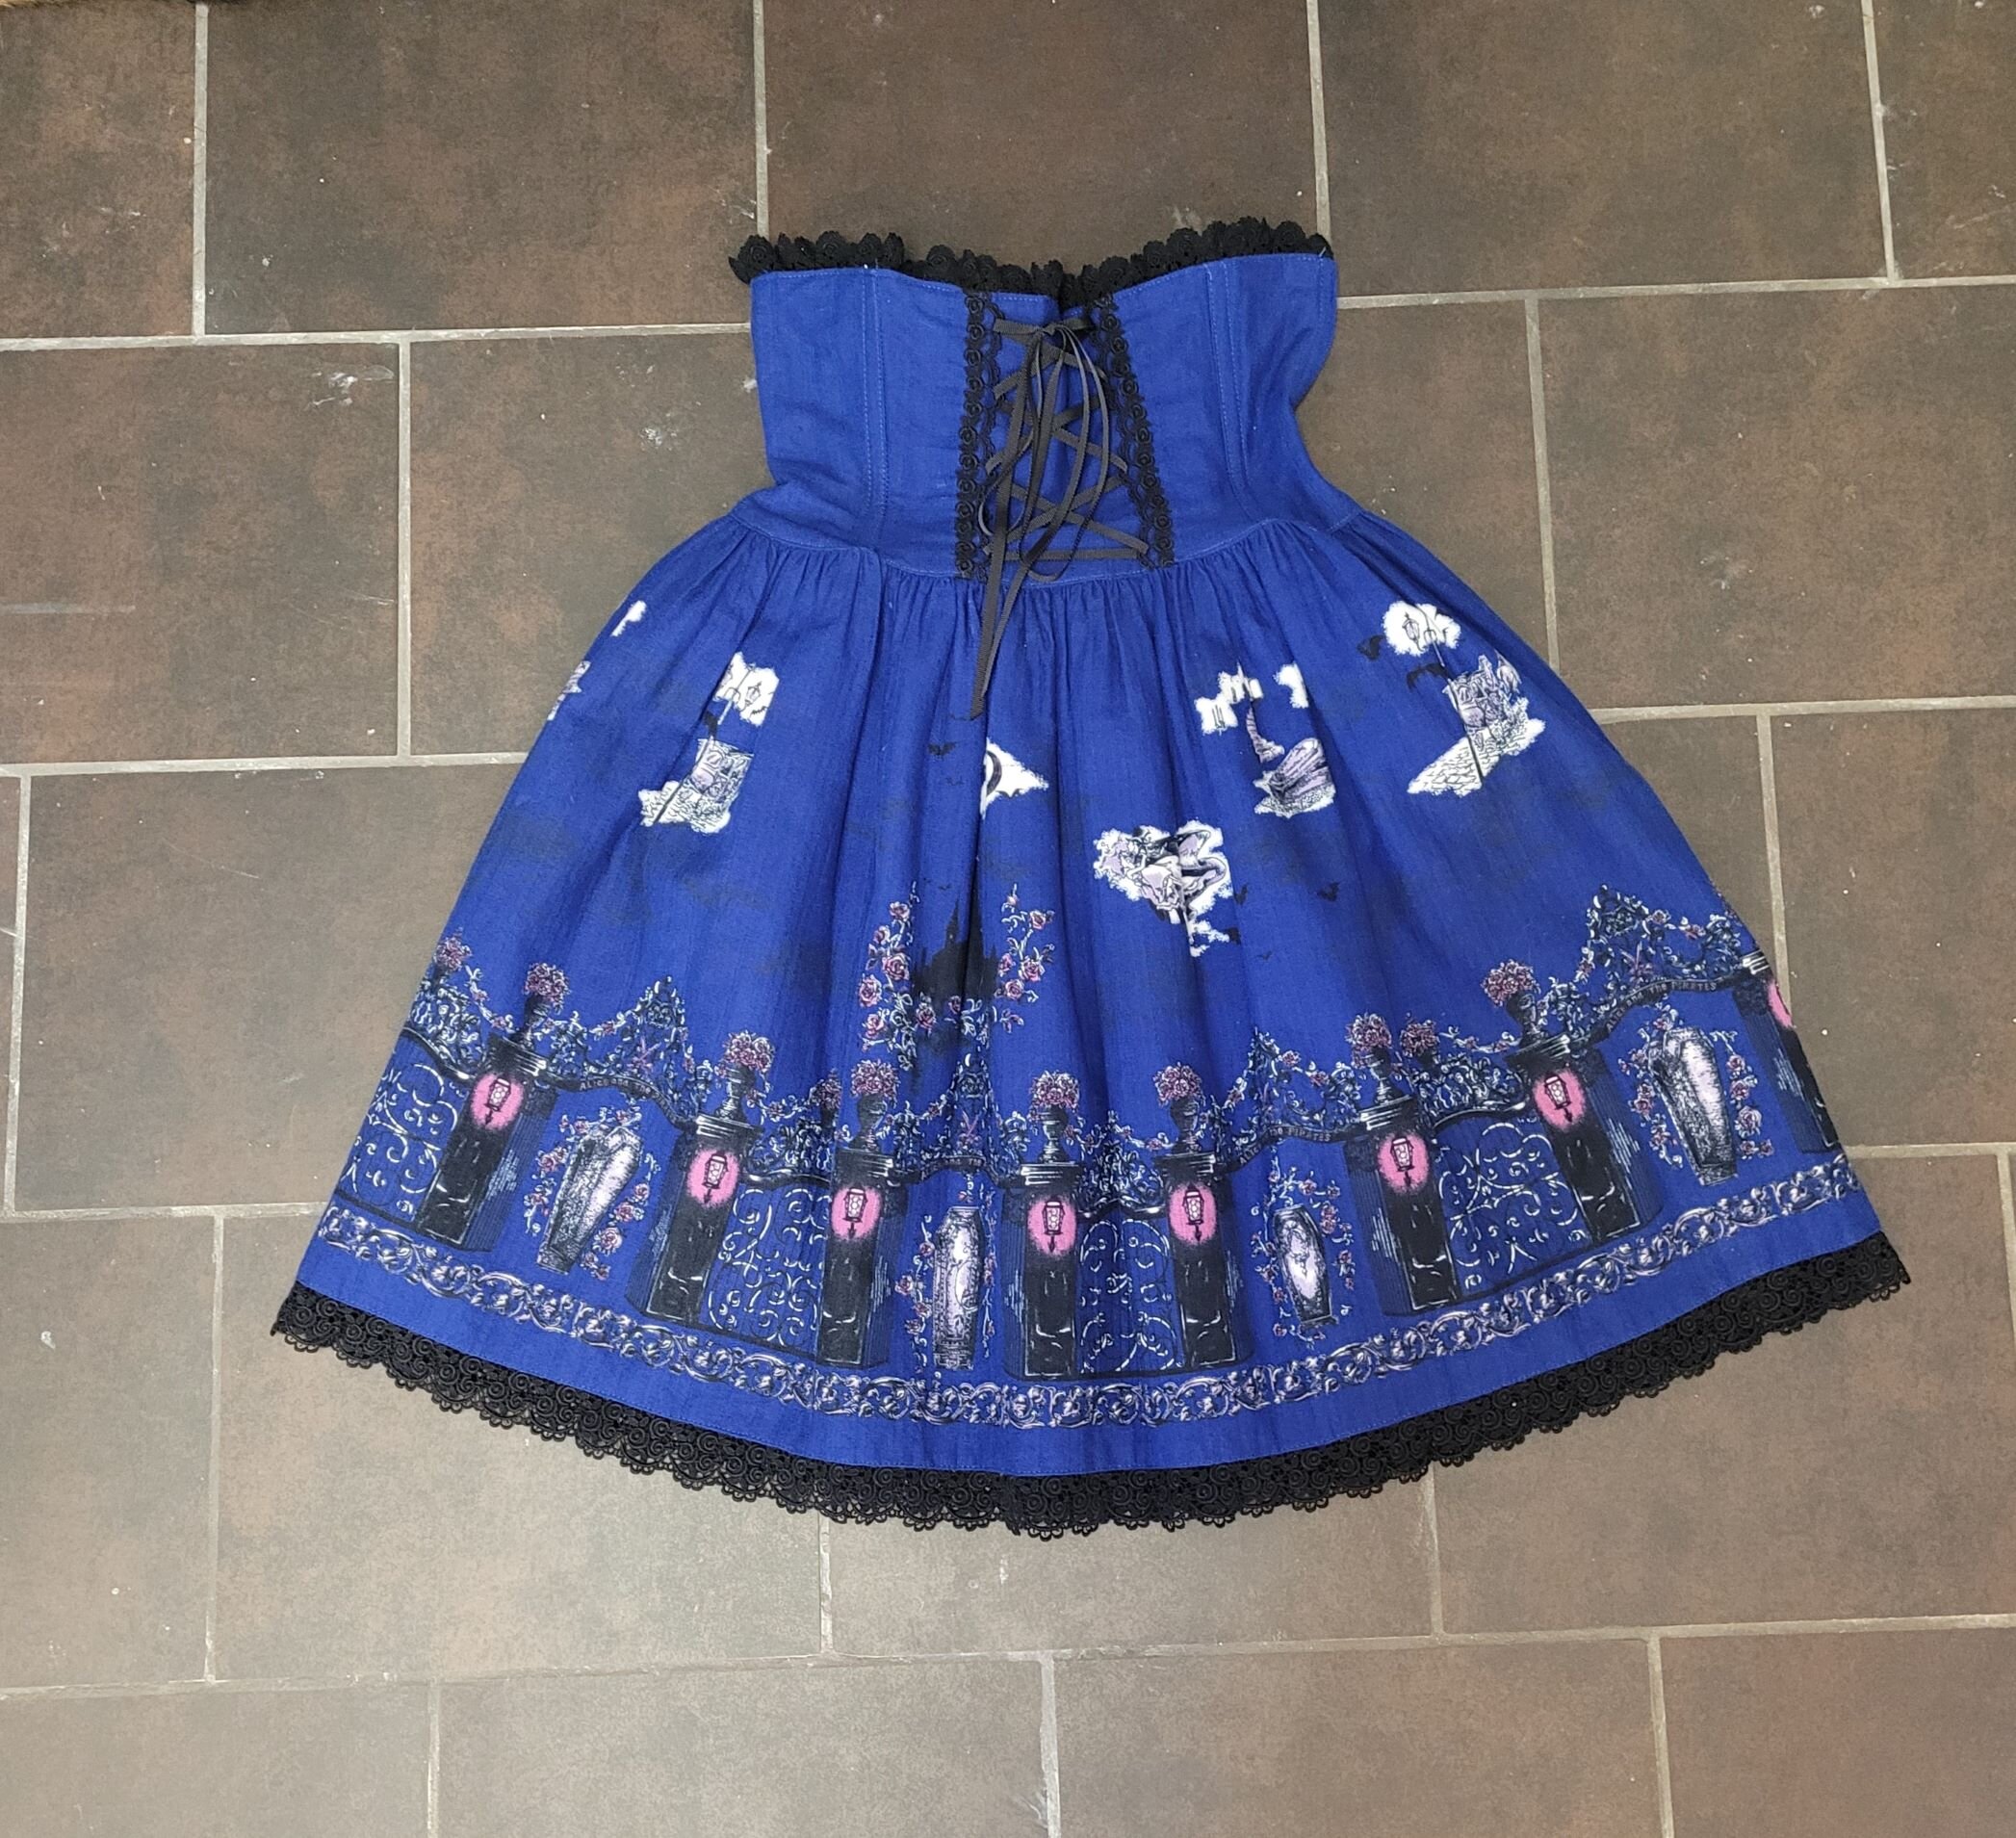 Pointywitchshoes Lolita Wardrobe 2021 — Mhoontown Goods